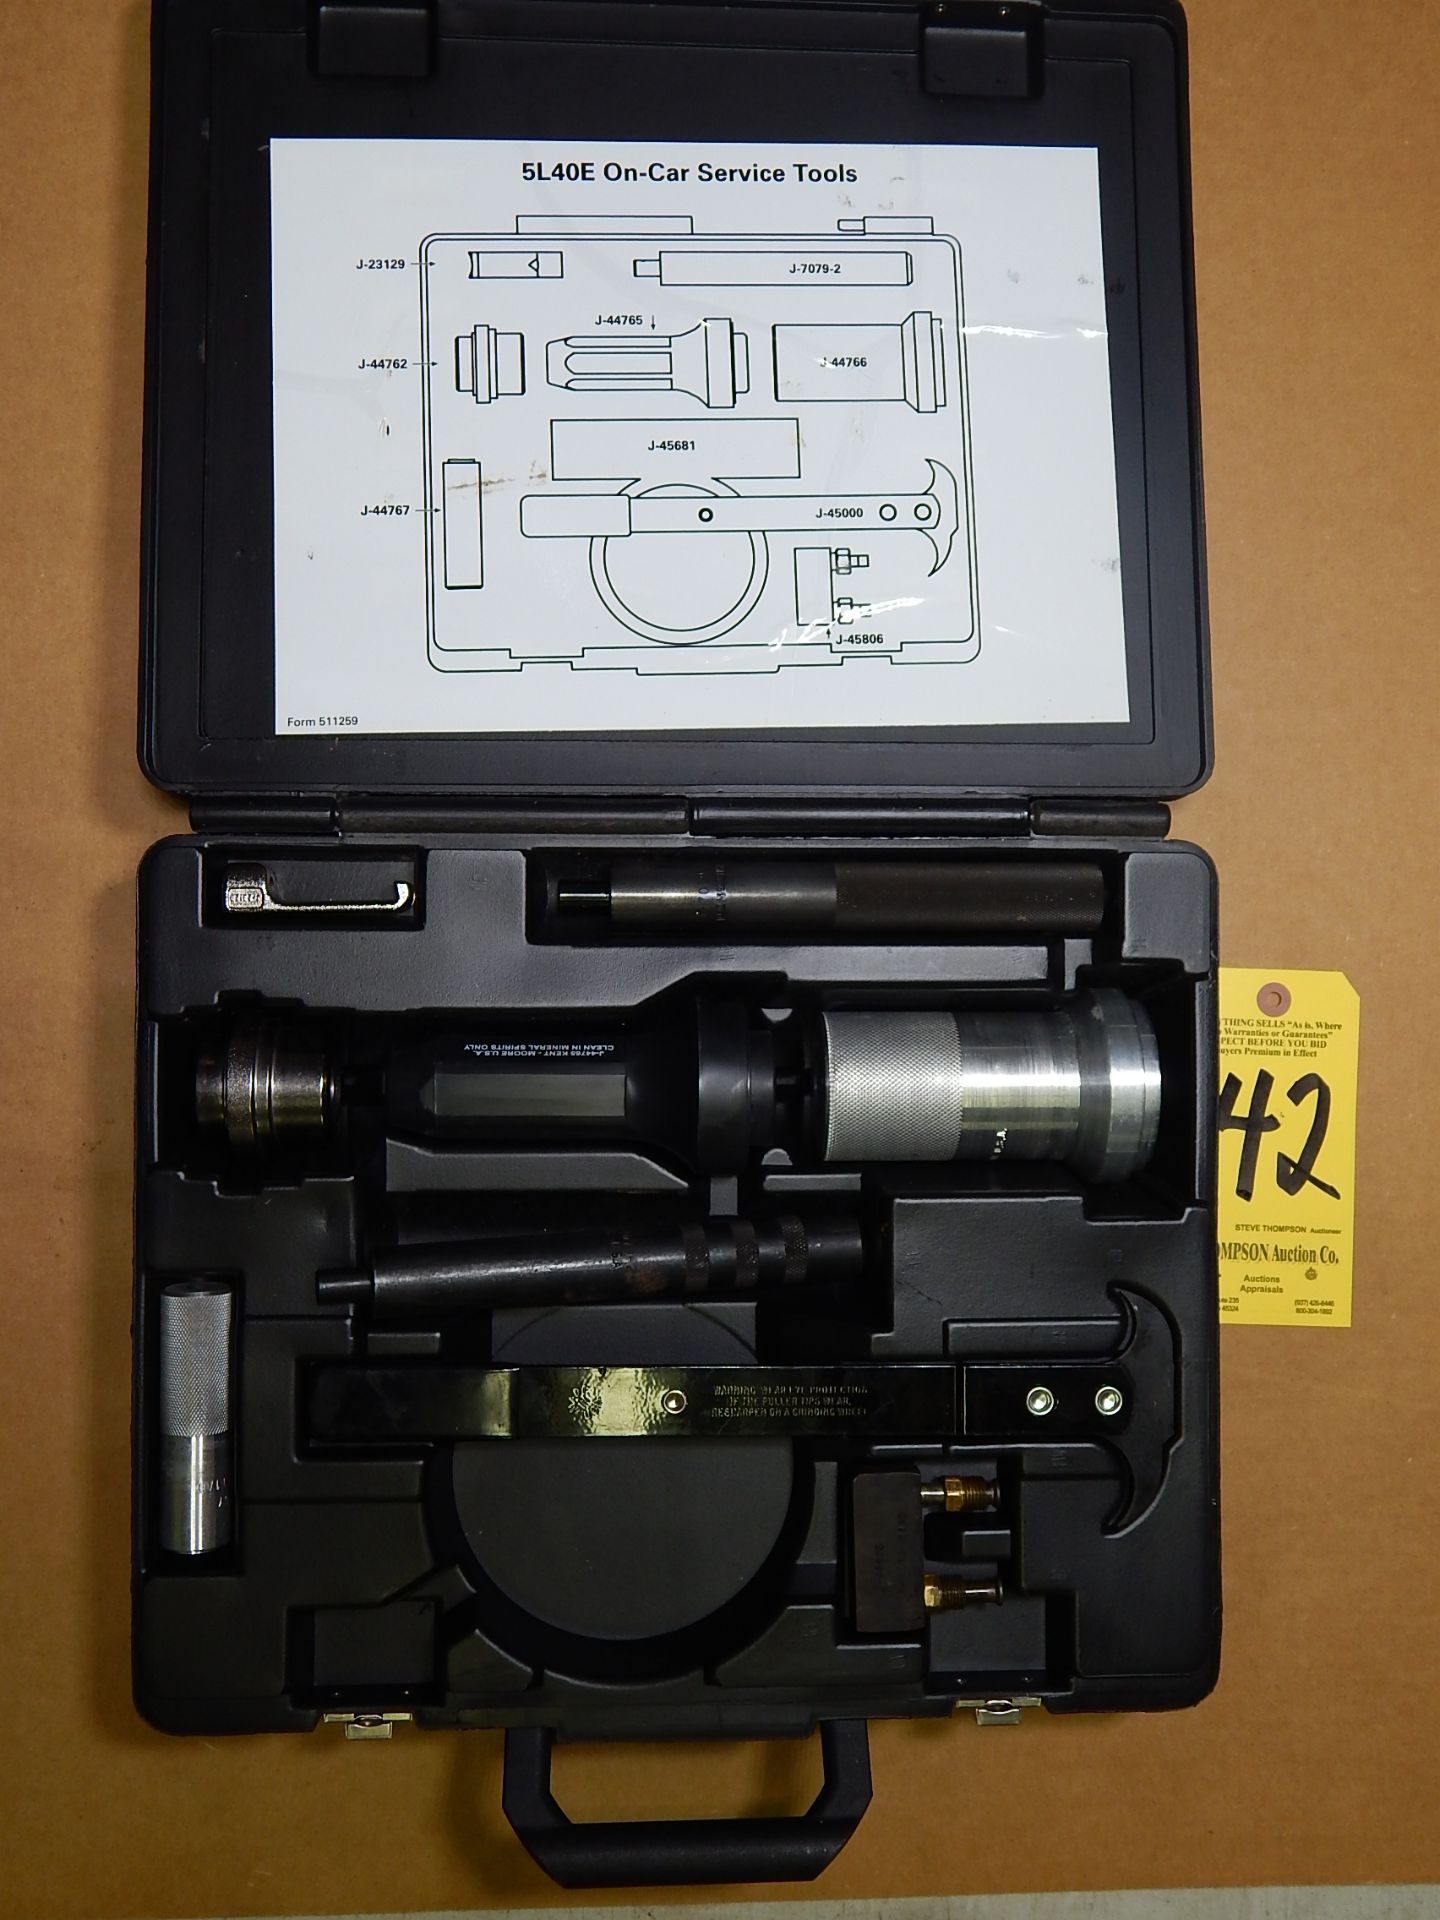 SPX Kent-Moore 5L40E On-Car Service Tools with Case